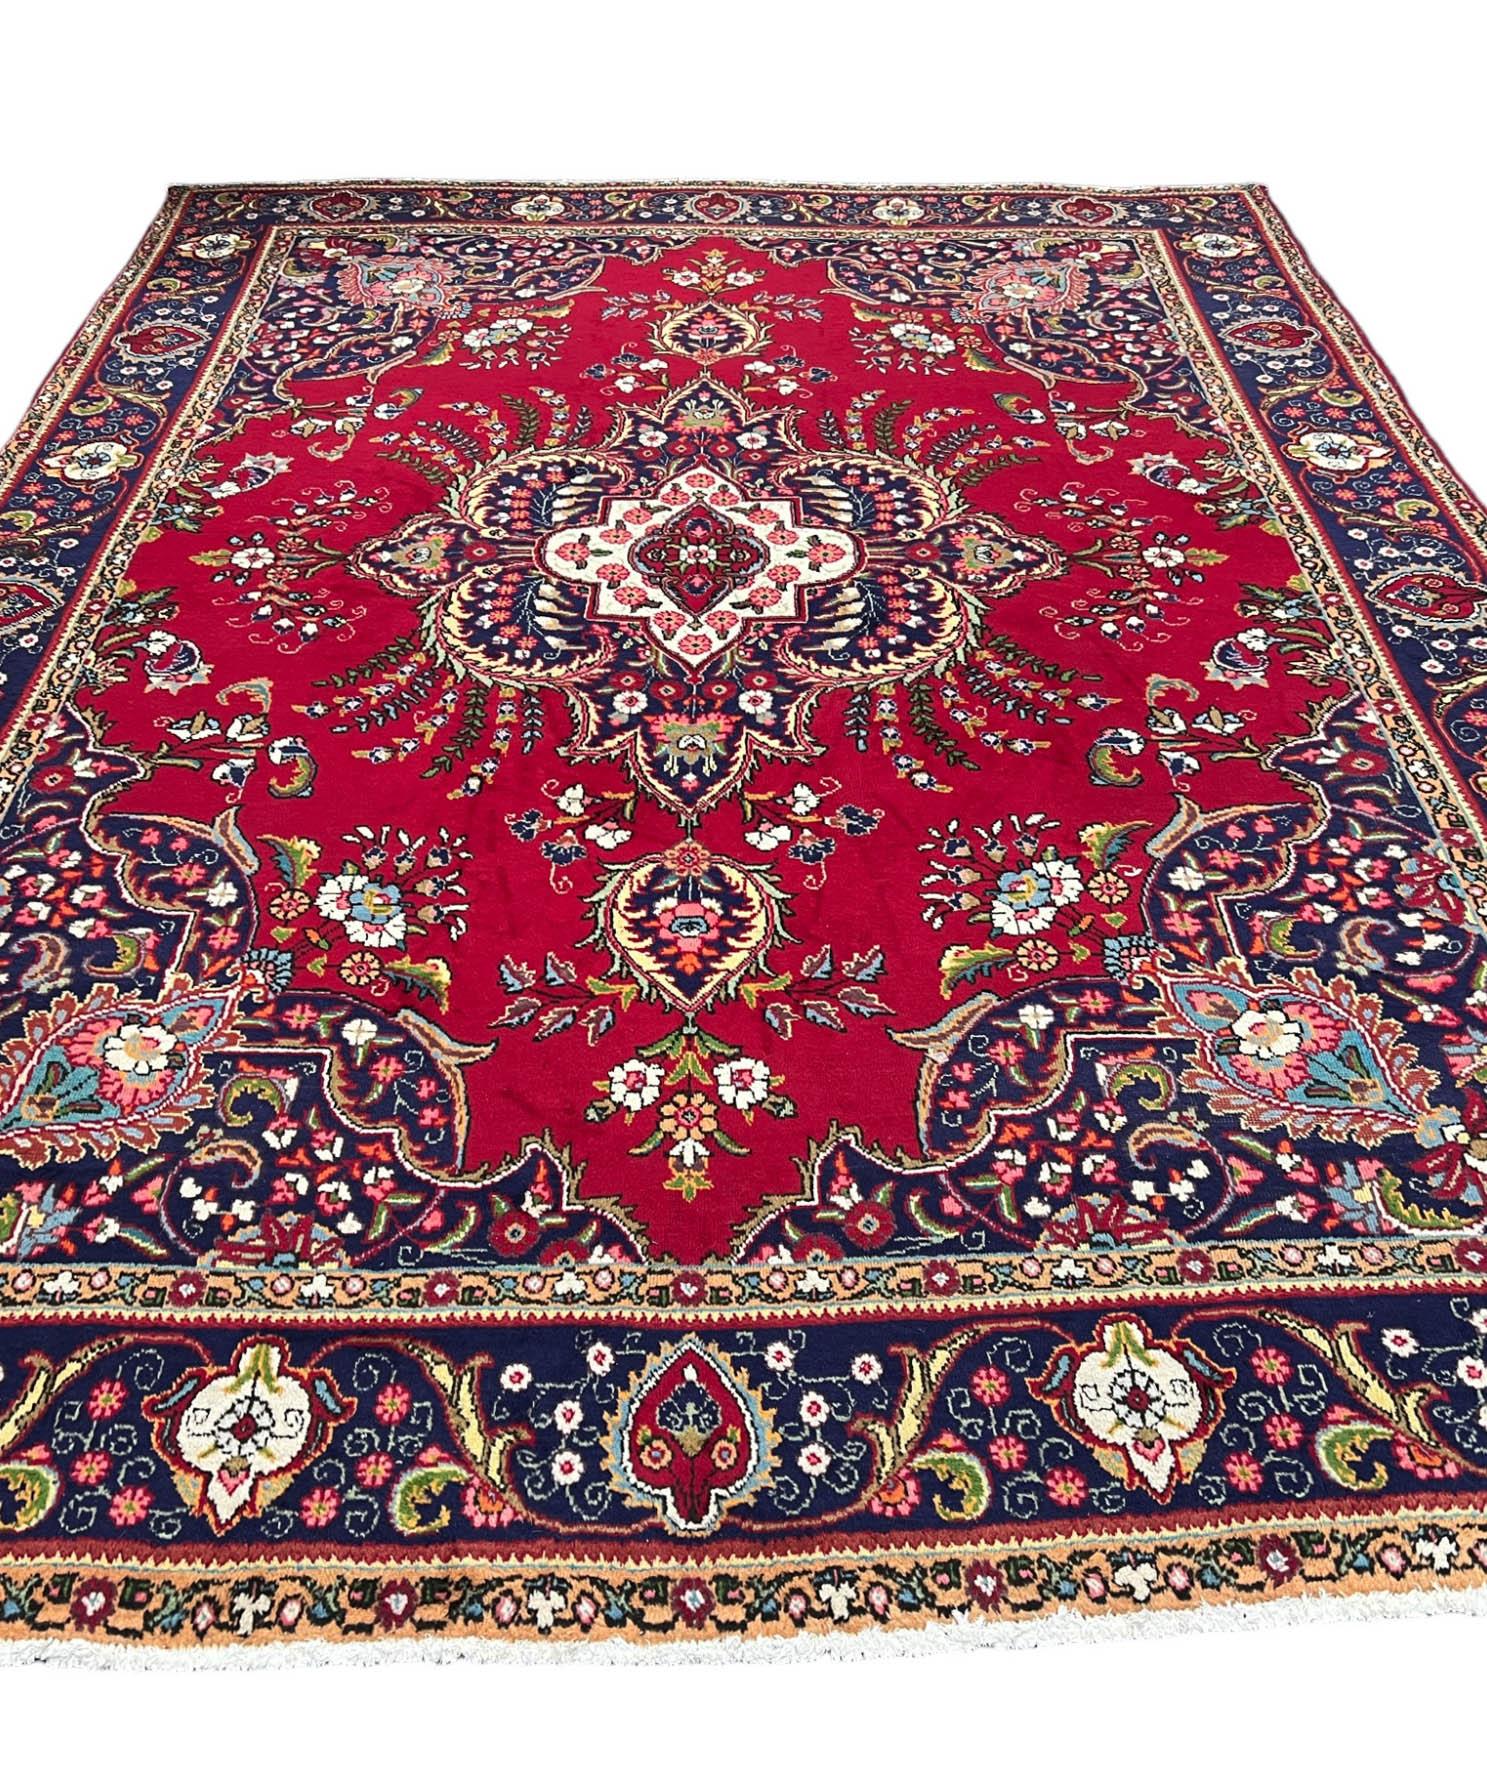 A stunning vintage Persian Tabriz. The rug boasts a combination of vibrant reds complemented by accents of blues, greens, and subtle muted yellows. The intricate patterns and rich colors effortlessly create an inviting focal point, adding warmth and